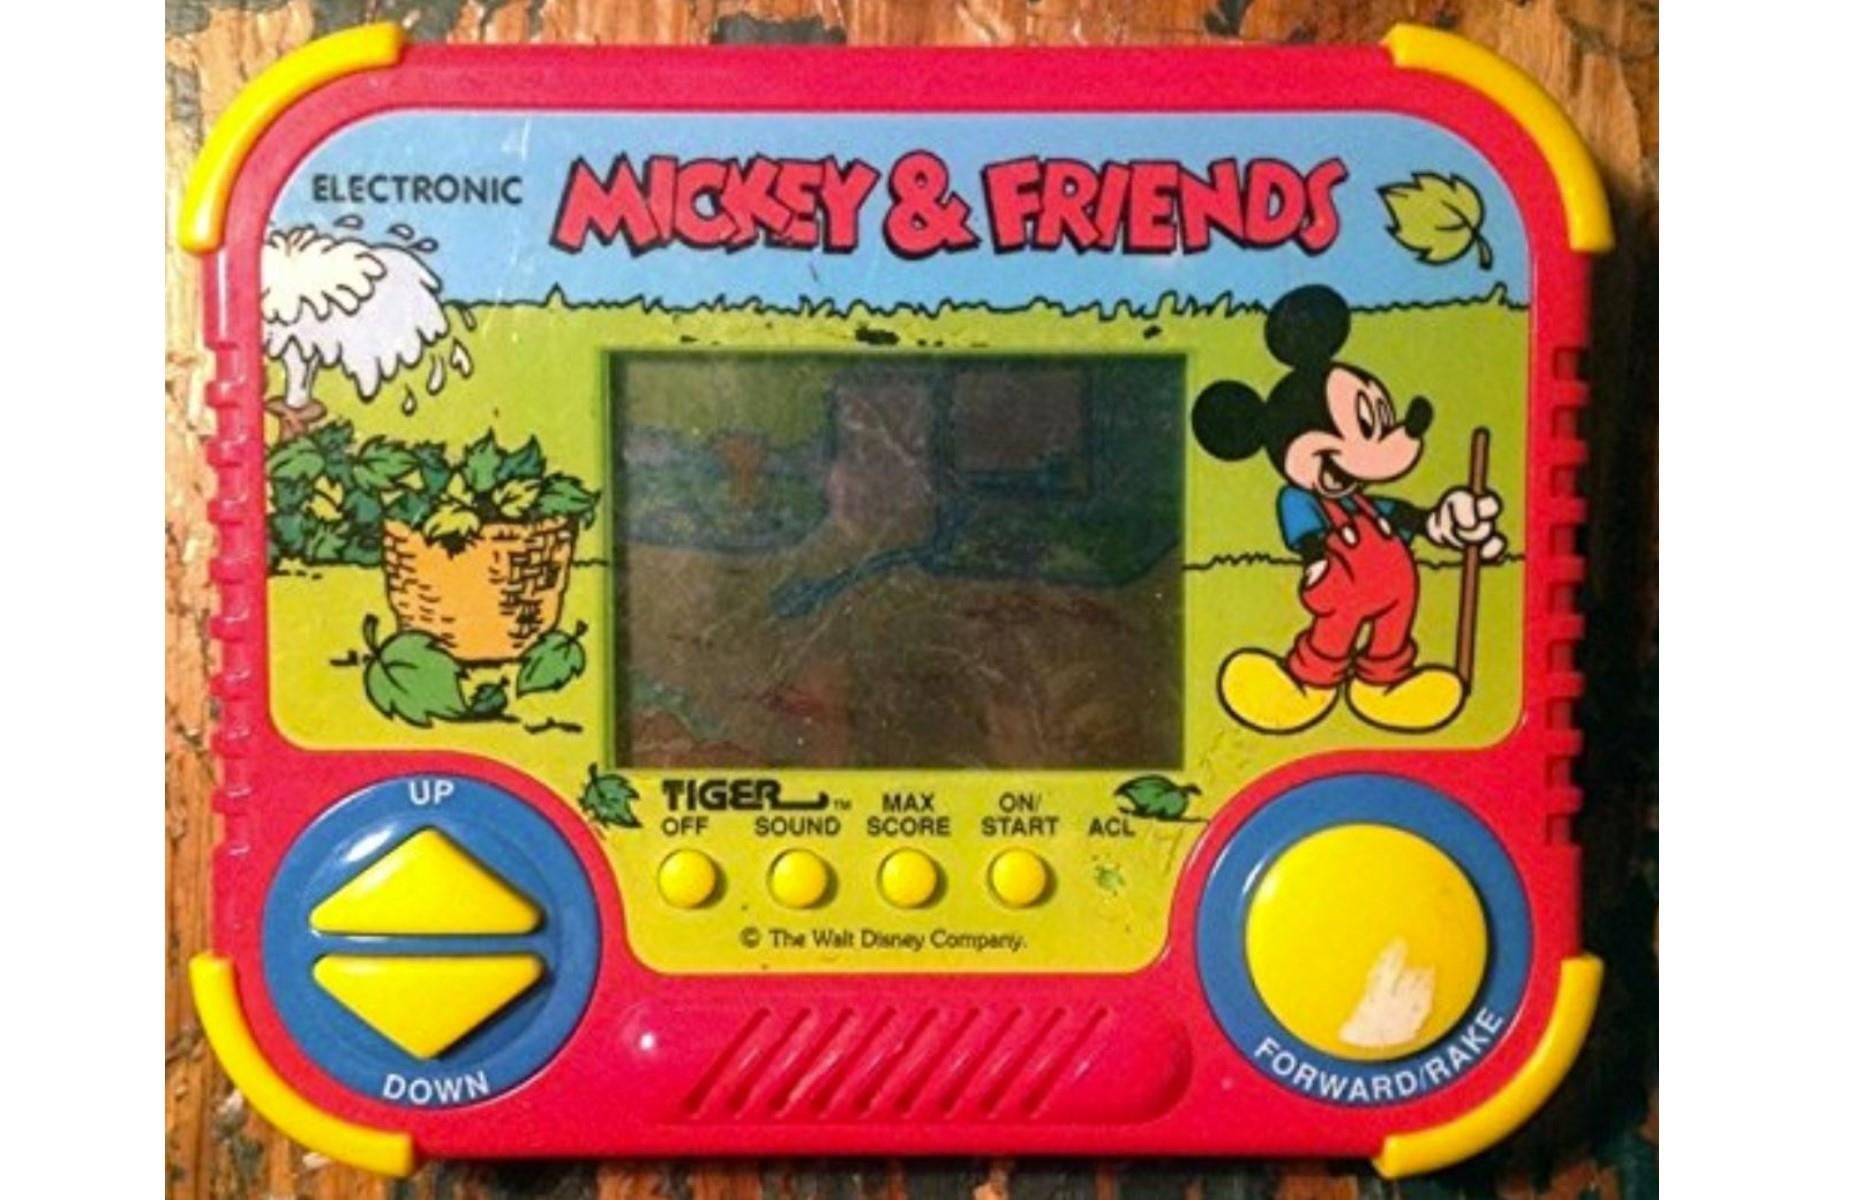 Tiger Electronics Mickey & Friends handheld game: up to $150 (£116)